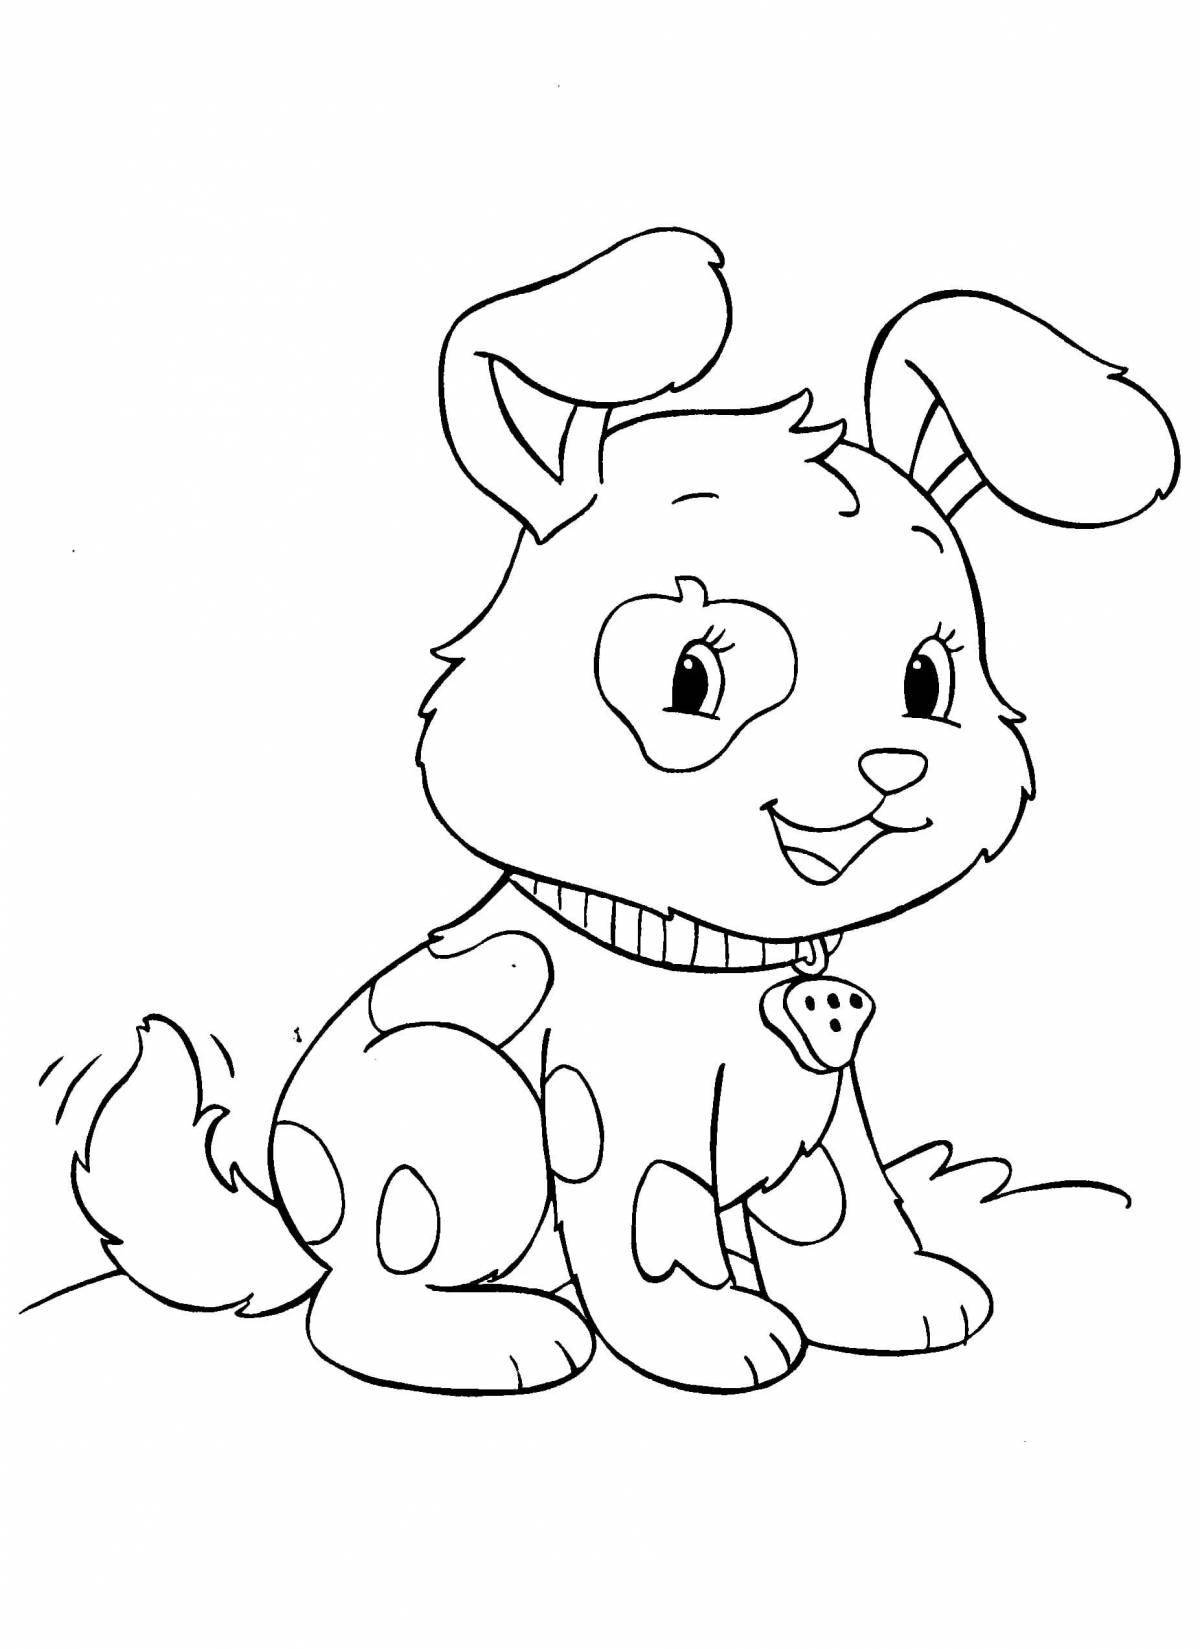 Fancy animal coloring page